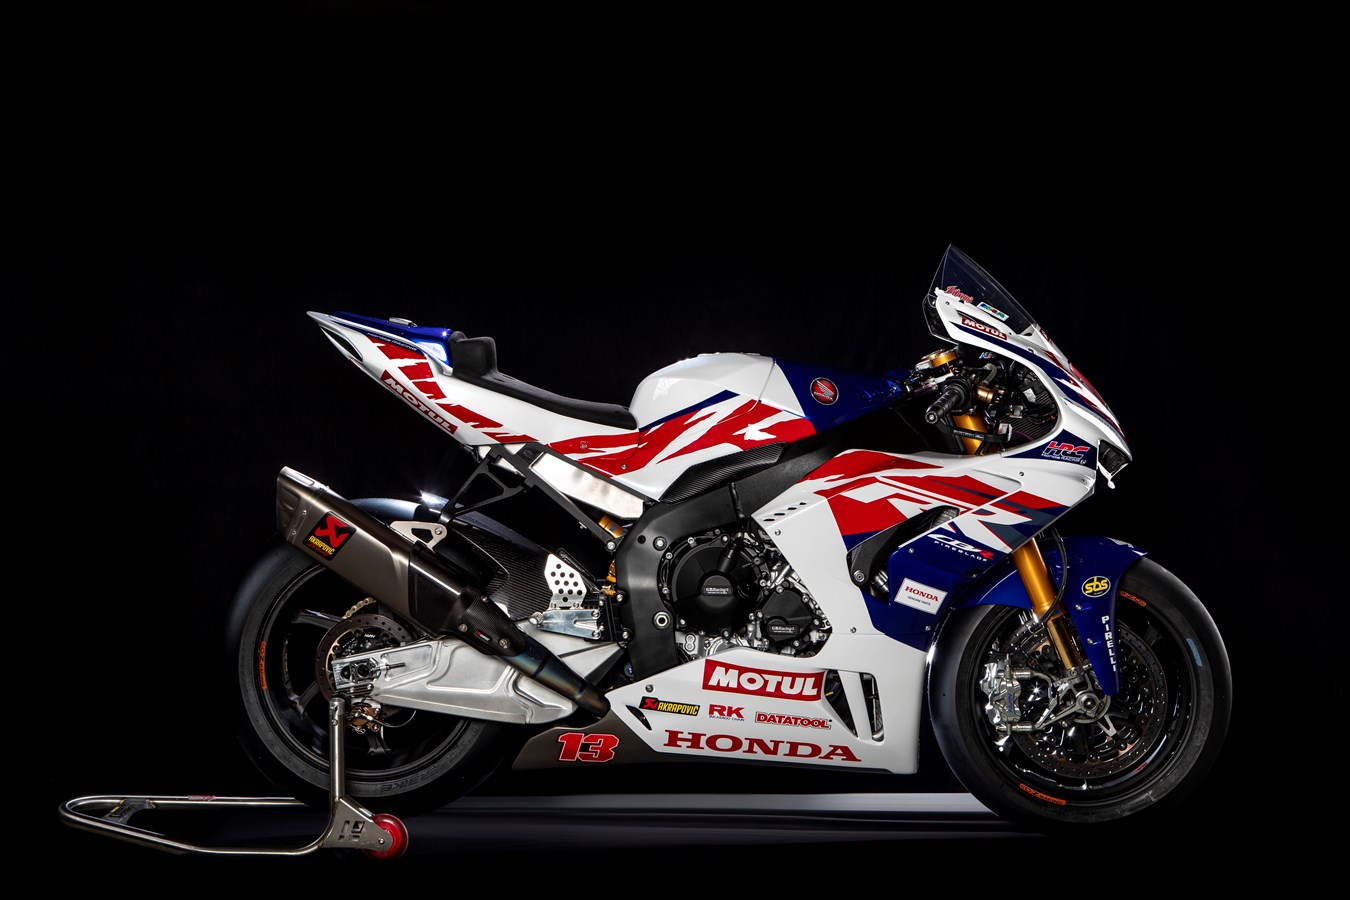 Honda Racing UK and Motul a brandnew partnership in BSB and on the Roads